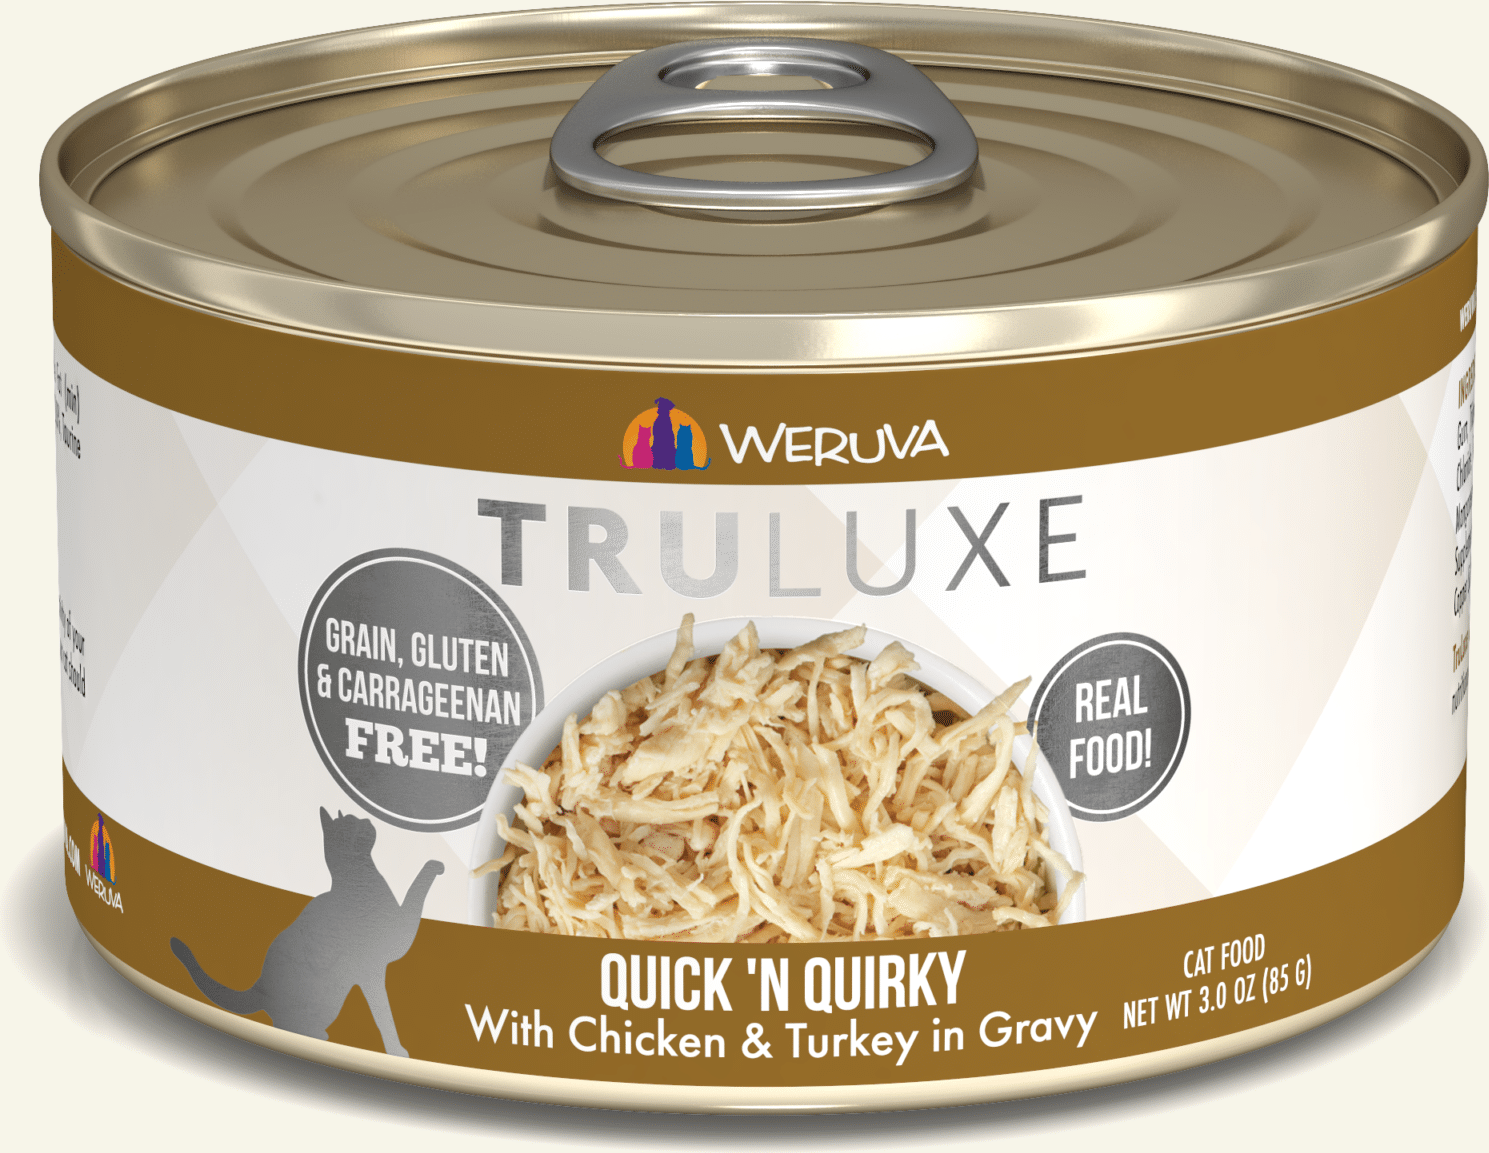 TruLuxe Quick 'n Quirky